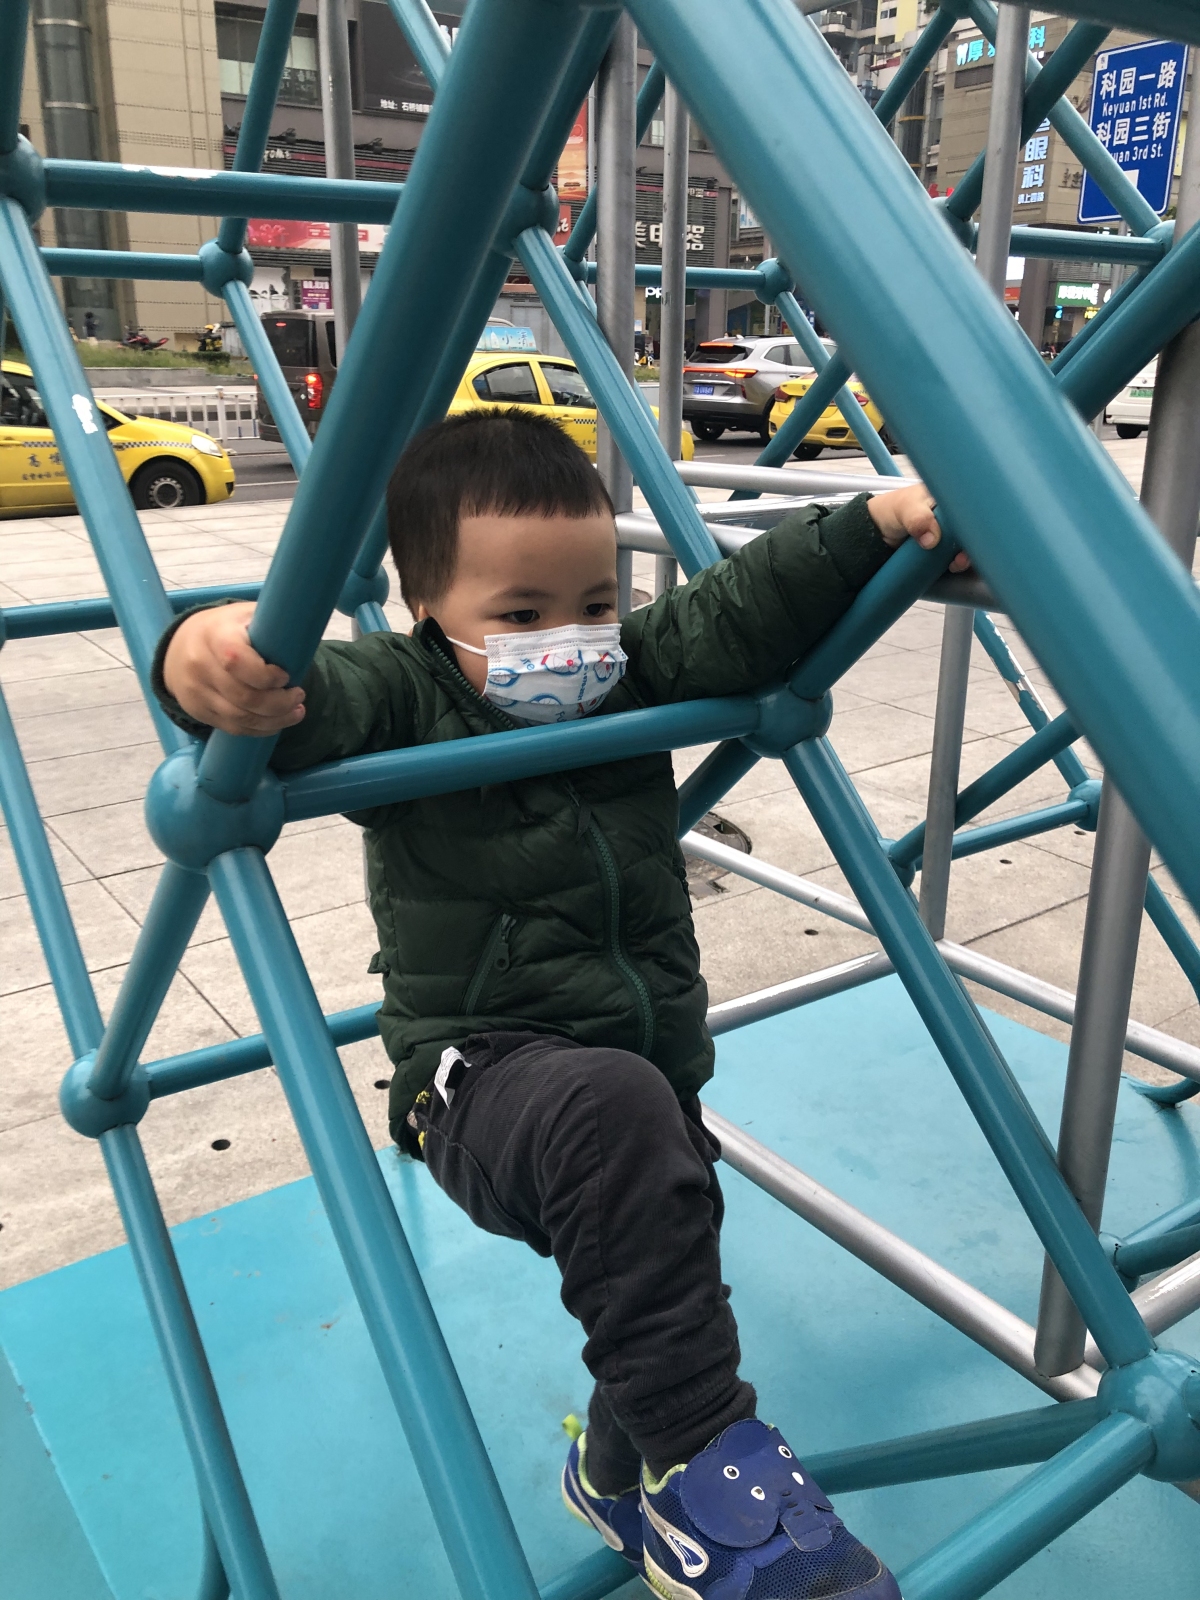 Ethan, wearing a mask in public even as he plays and climbs.